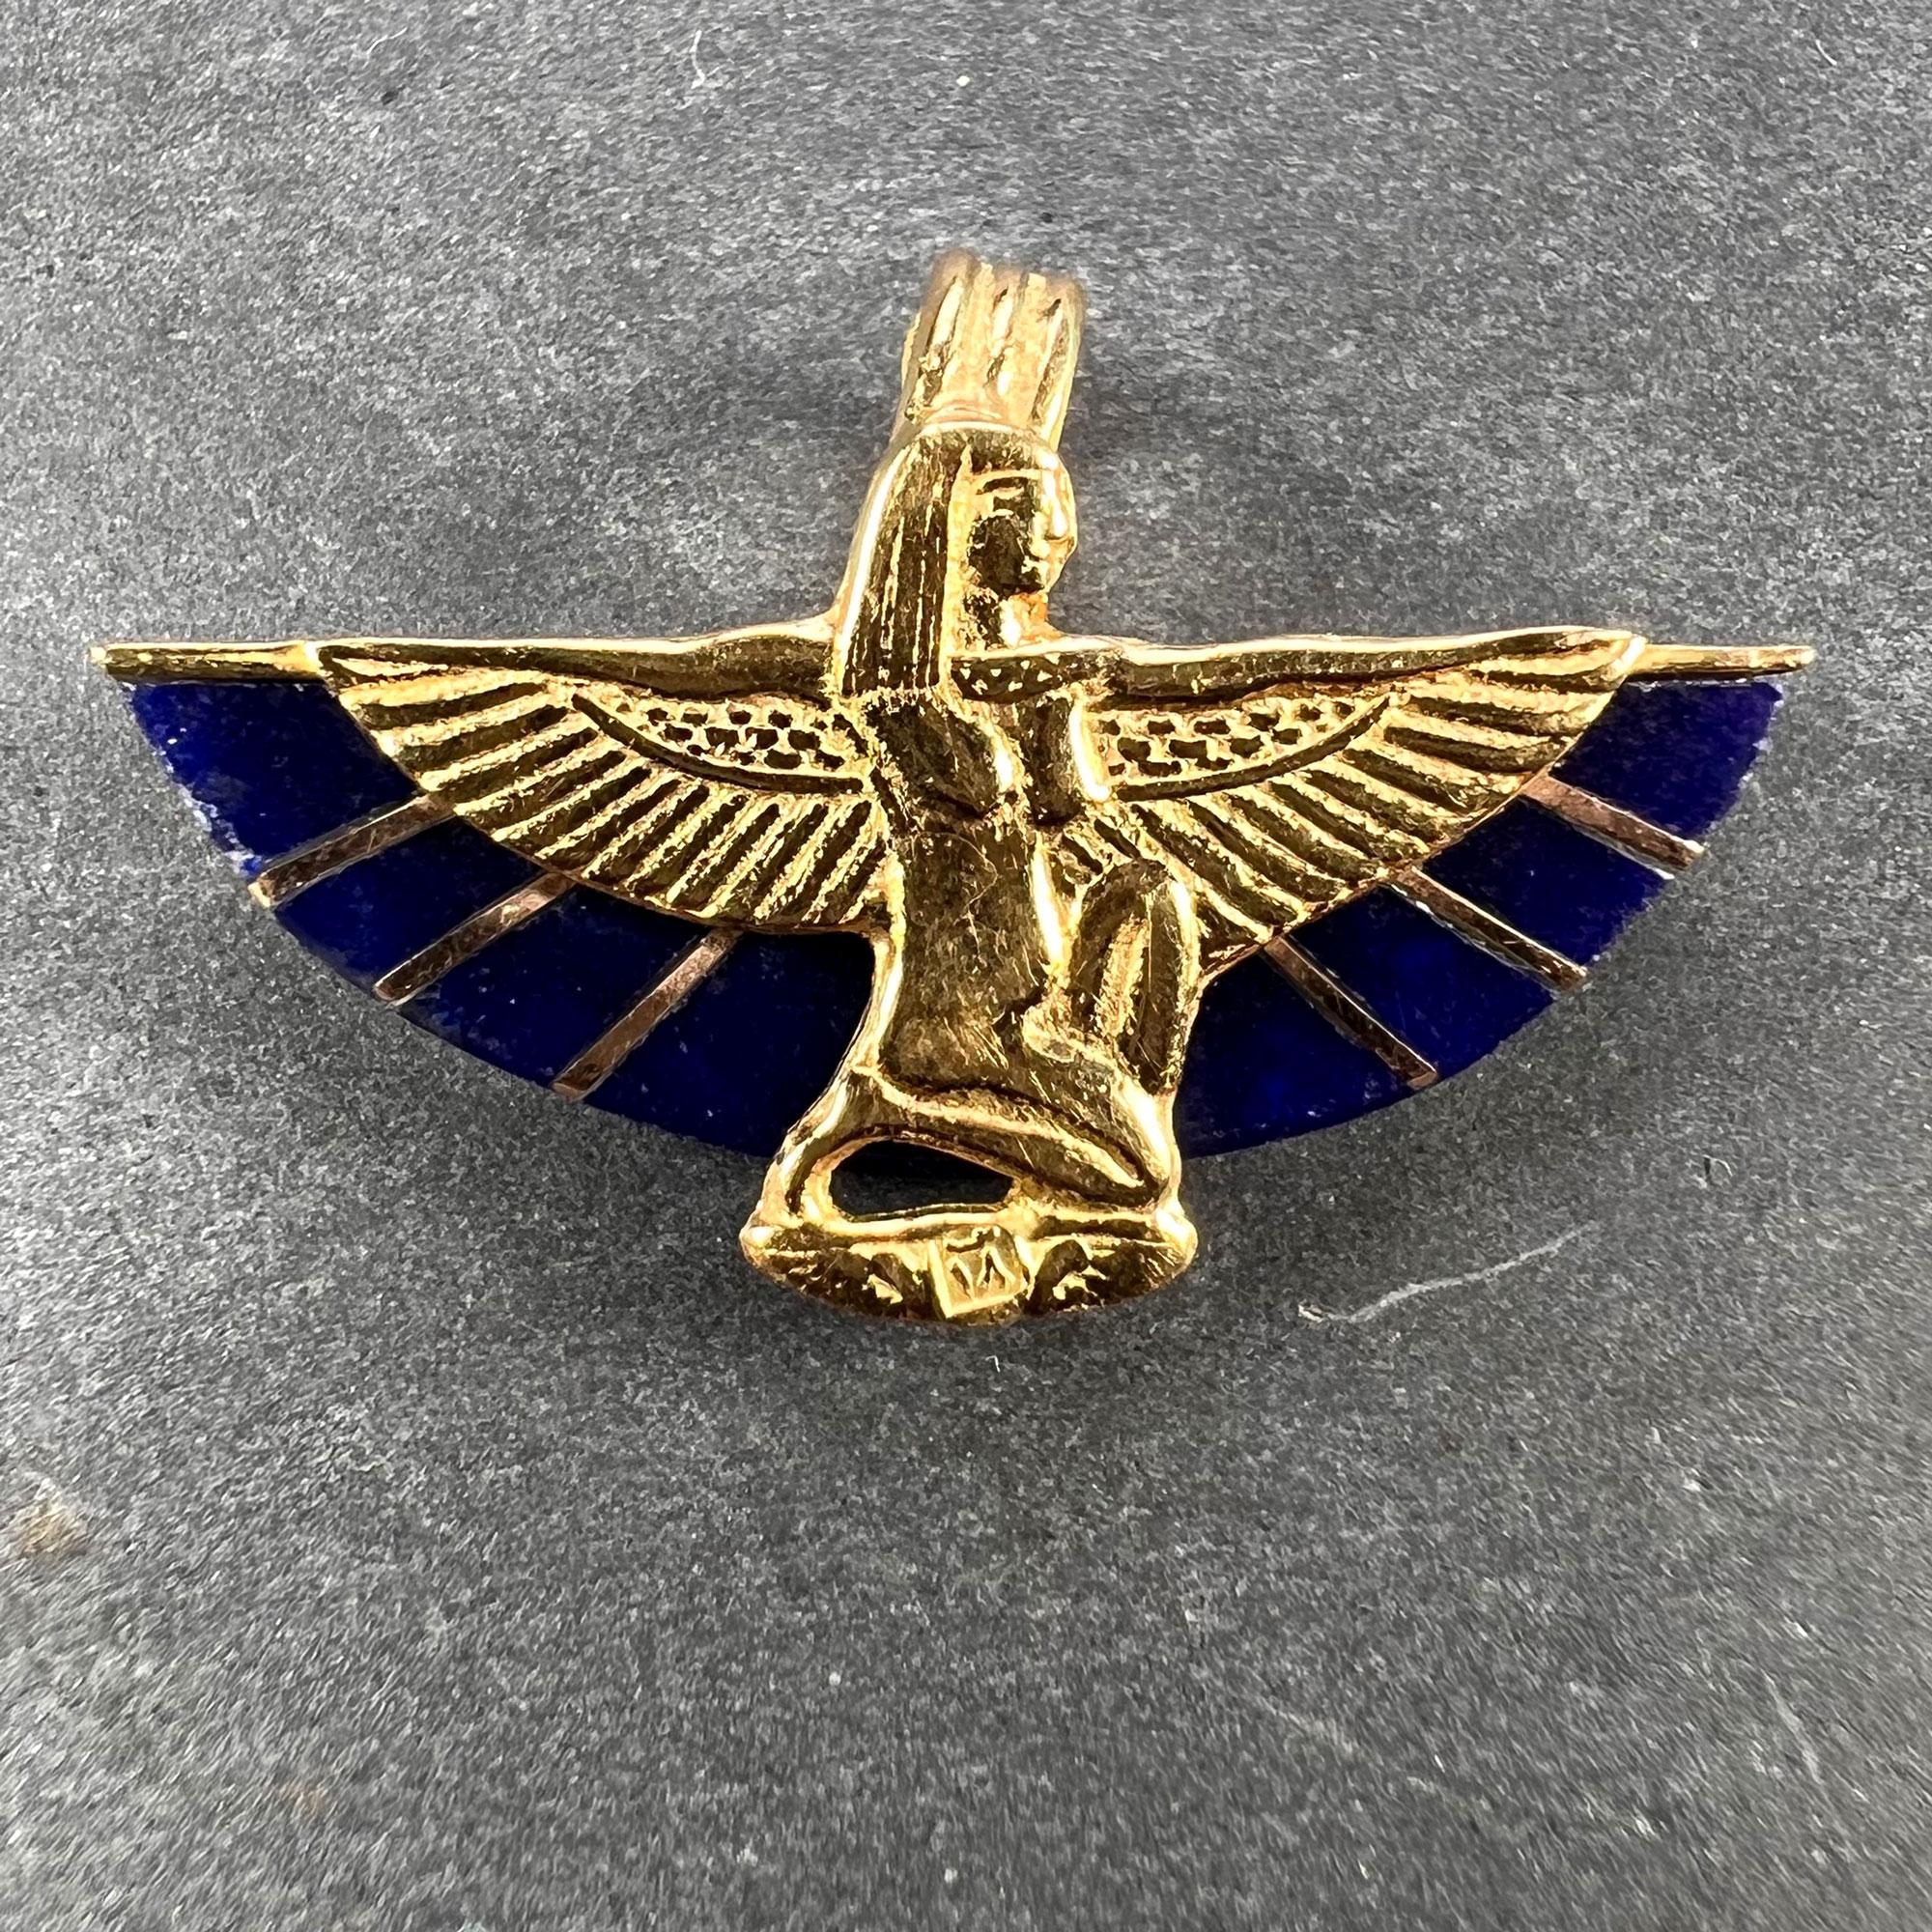 An 18 karat (18K) yellow gold pendant designed as the Goddess Isis with outstretched wings. The wings are carved from a lapis lazuli simulant. Stamped with Egyptian marks for 18 karat gold.

Dimensions: 1.6 x 2.5 x 0.35 cm
Weight: 3.08 grams
(Chain